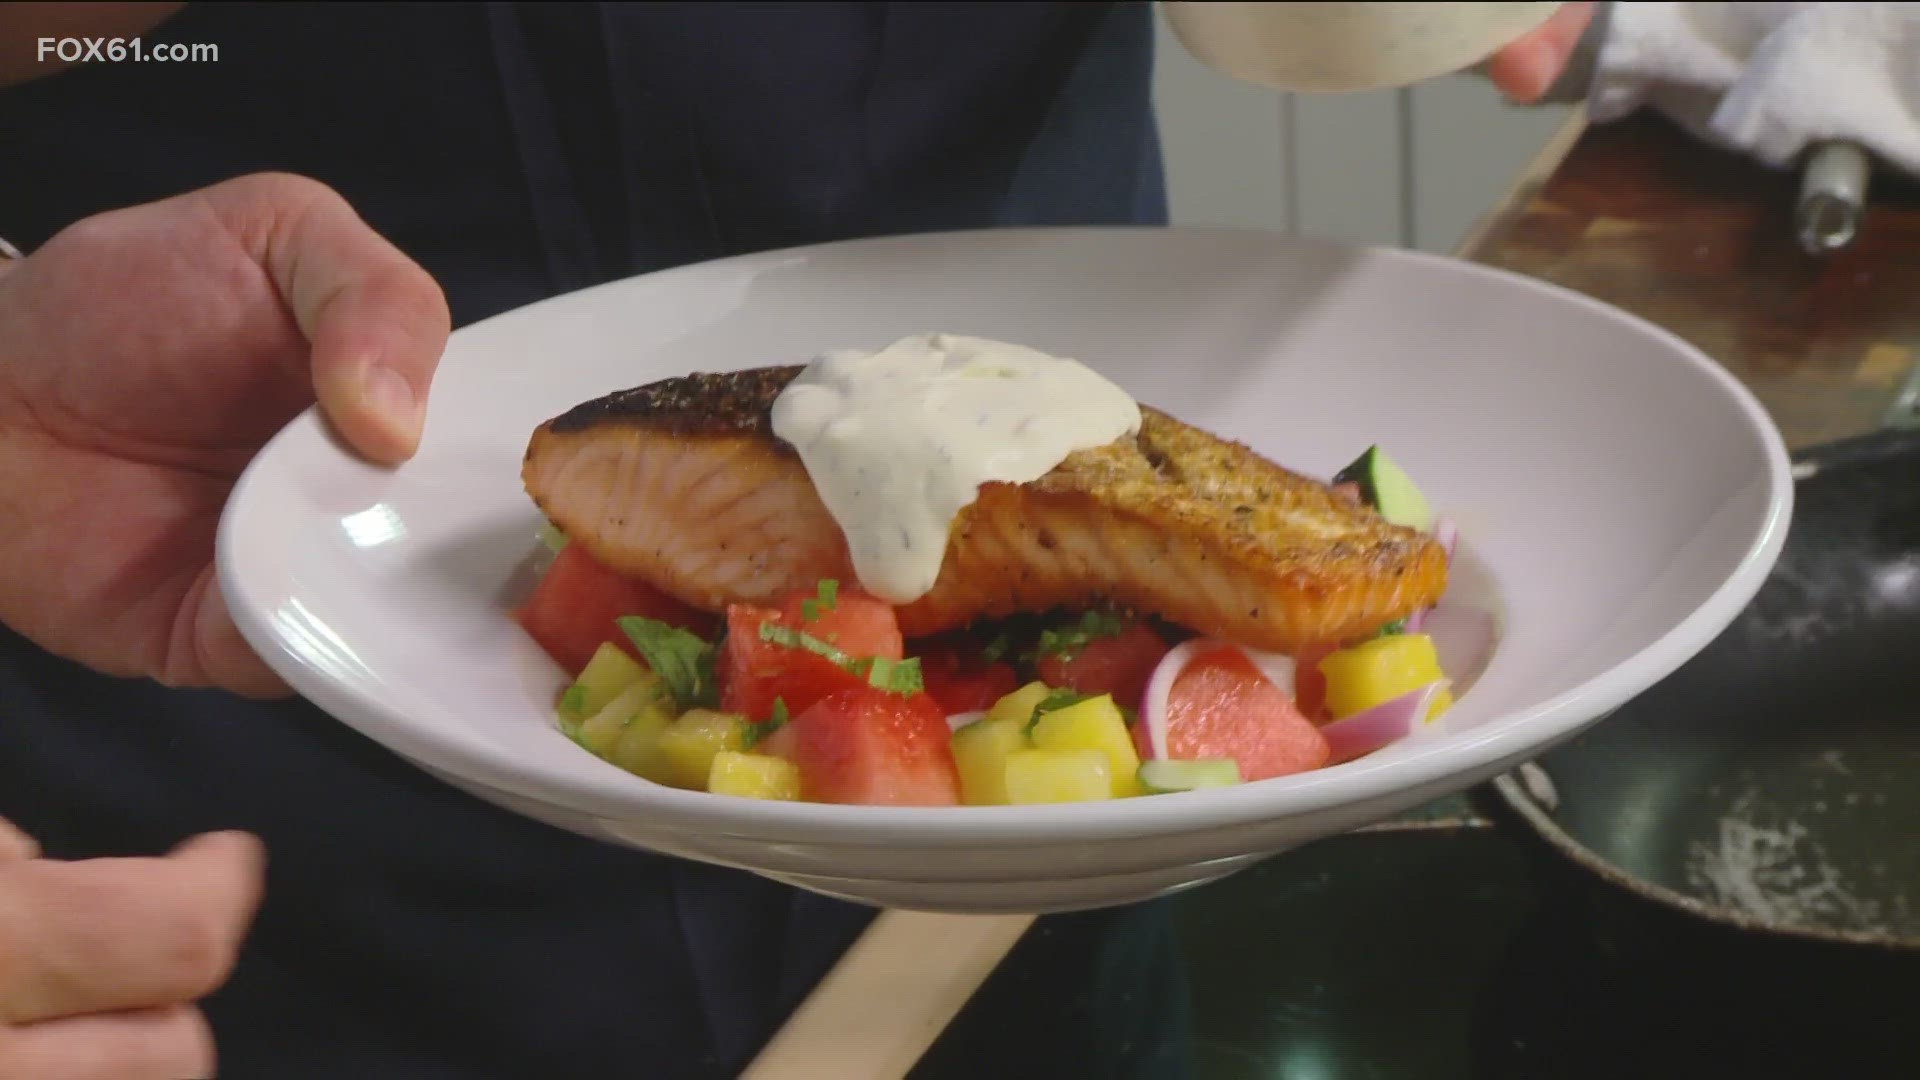 Executive Chef of Feng Chophouse, Kevin Herring, shows us how to make a delicious salmon salad with yuzu creme fraiche to top it!